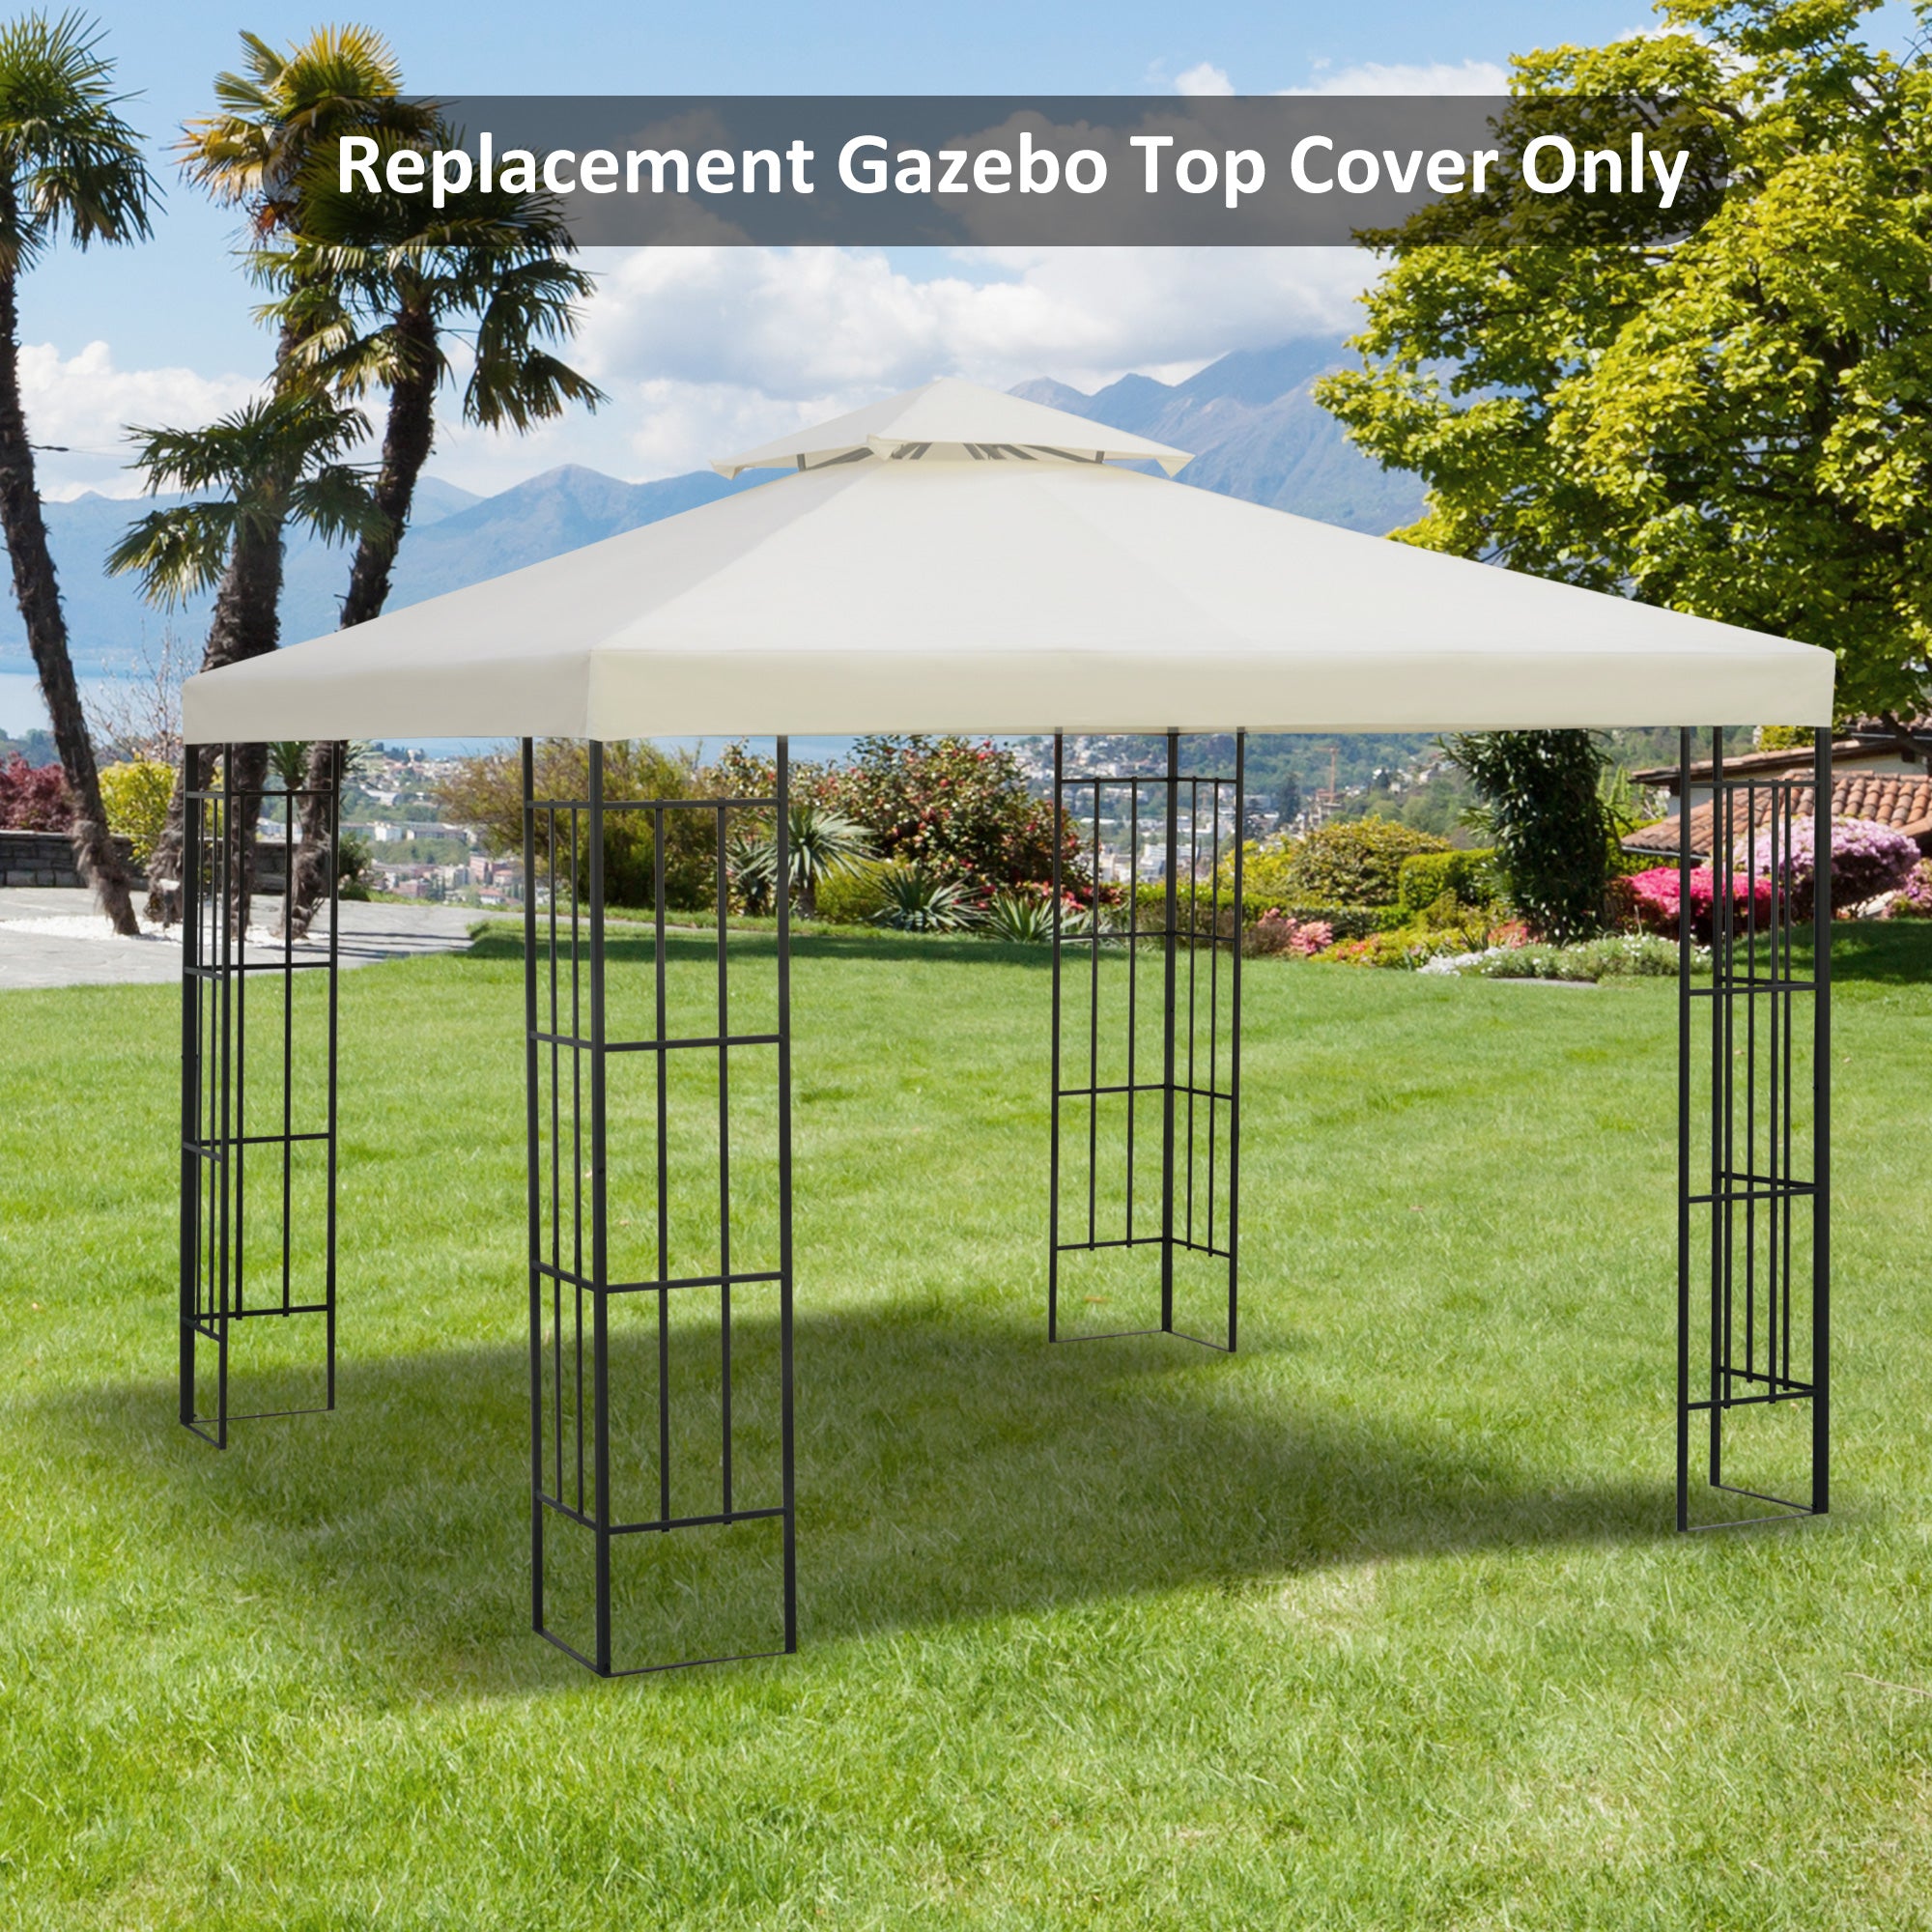 Outsunny 3(m) 2 Tier Garden Gazebo Top Cover Replacement Canopy Roof Cream White  | TJ Hughes